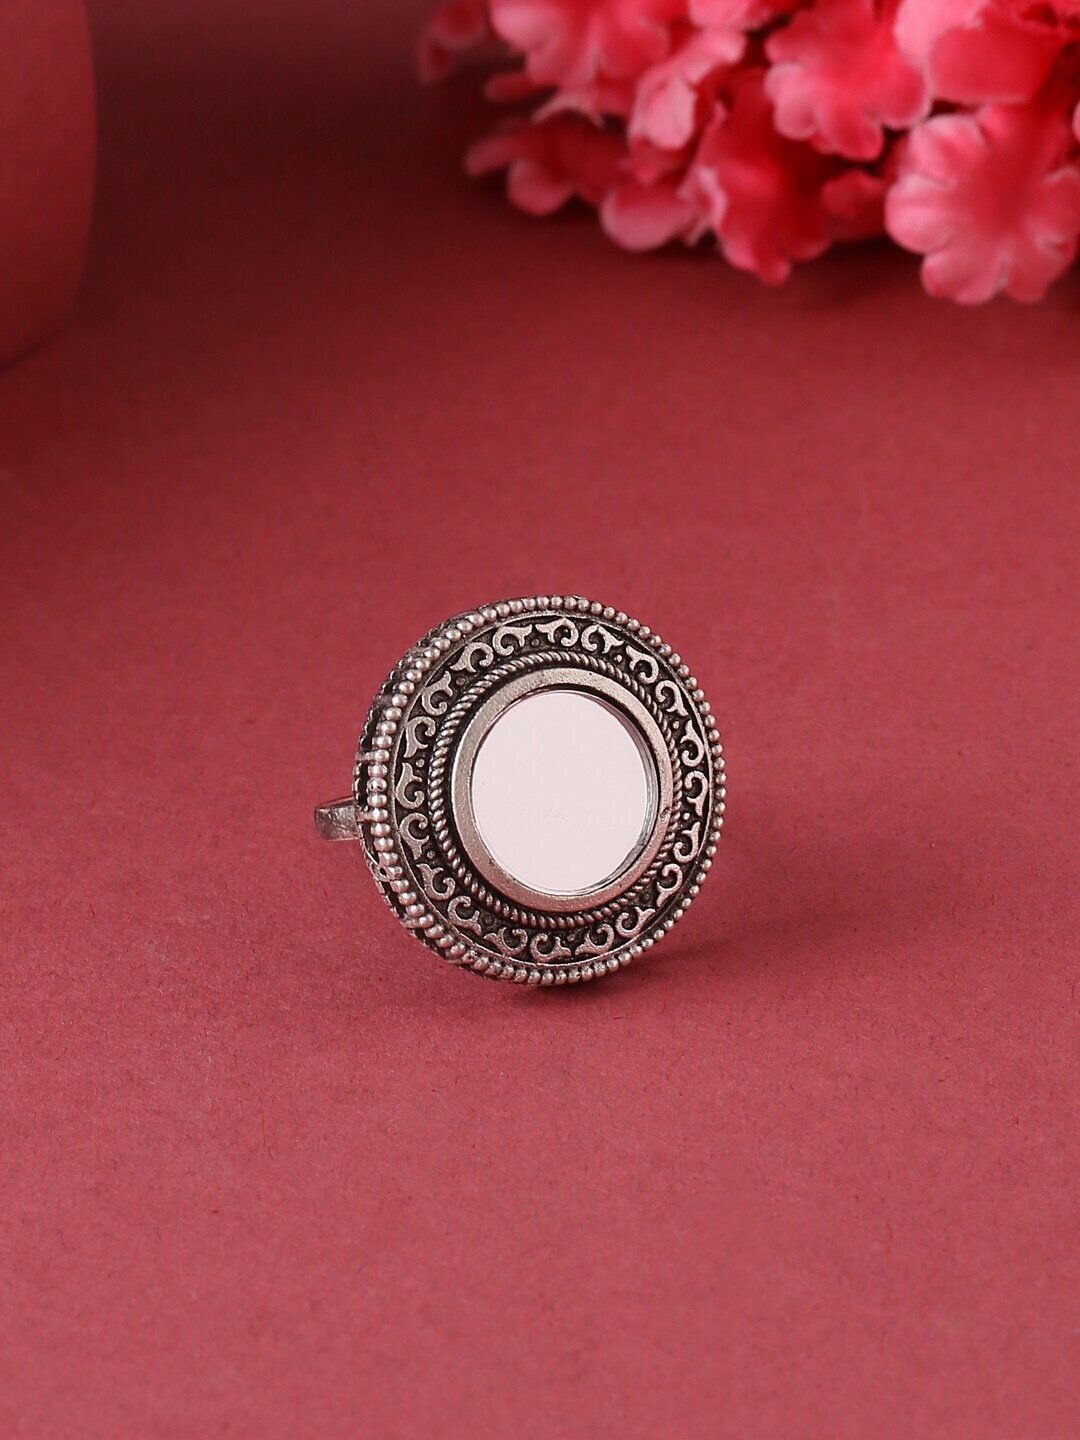 VIRAASI Oxidised Silver-toned Mirror-Studded Adjustable Finger Ring Price in India